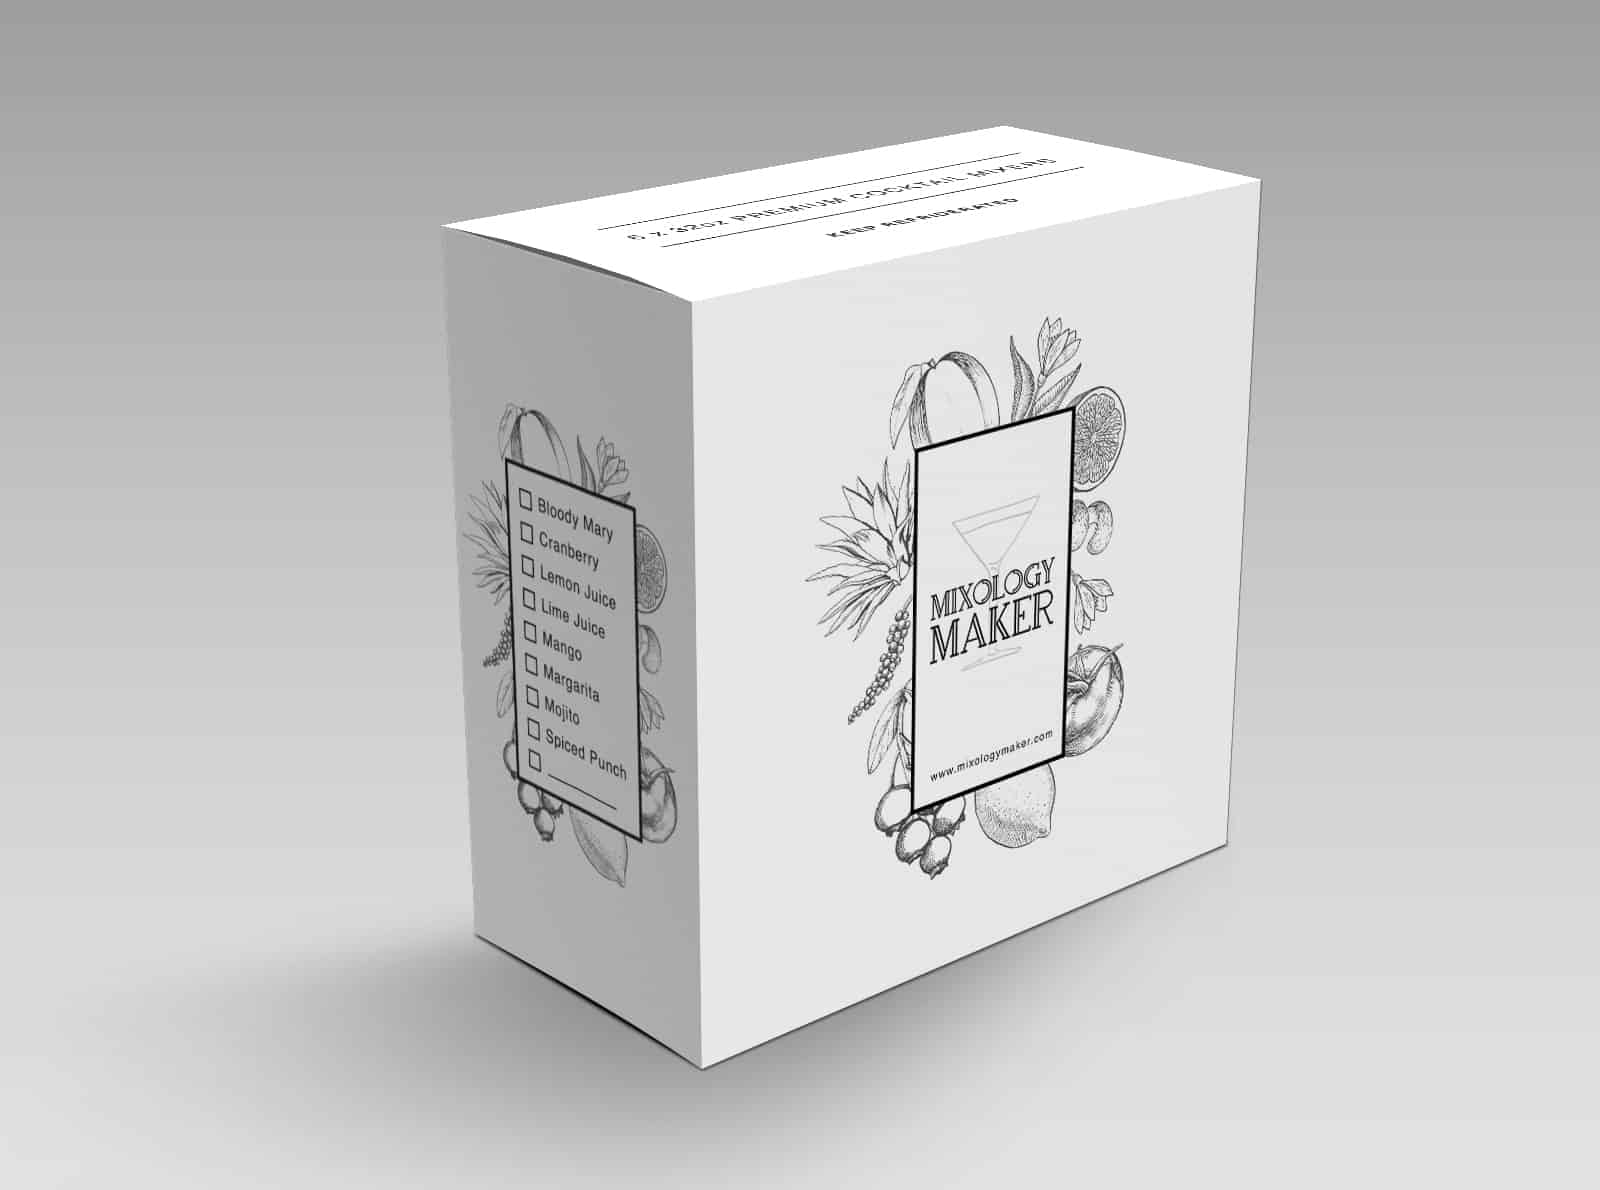 Creme de Mint's secondary packaging design for 6packs of Mixology Cocktail Mixers